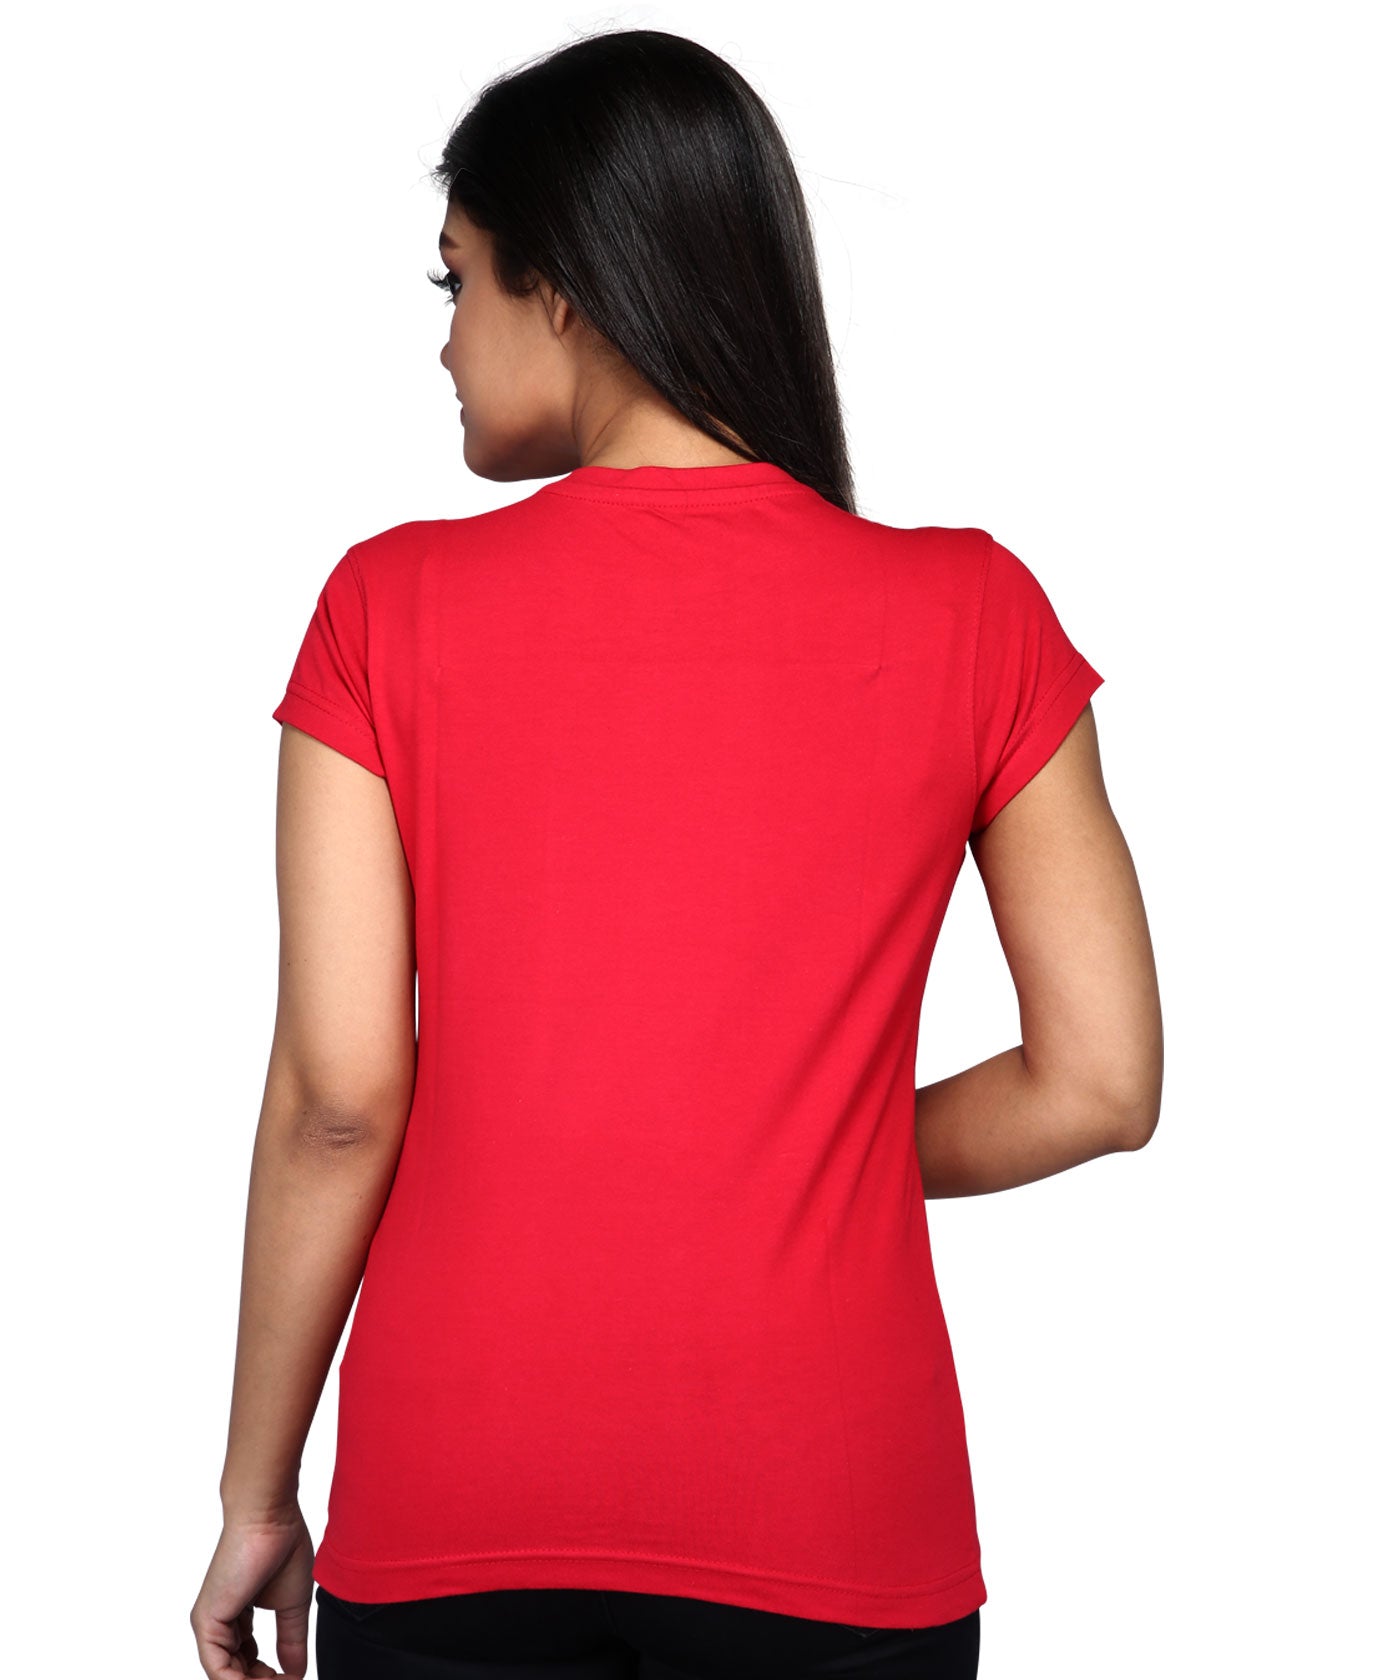 Scatter Square - Block Print Tees for Women - Red